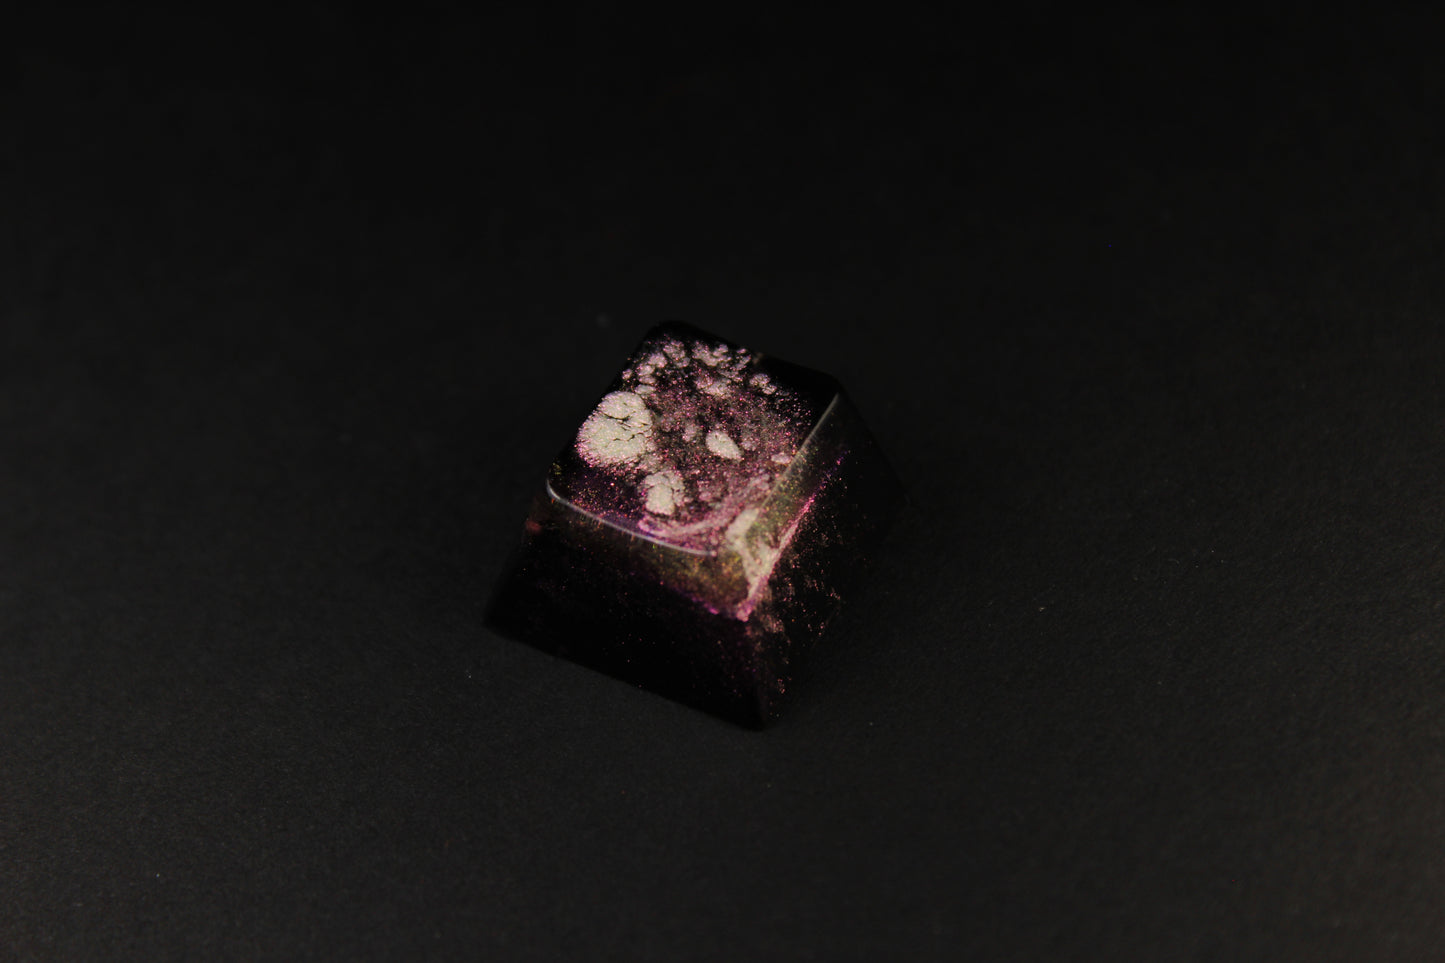 Cherry Esc - Star Shower - PrimeCaps Keycap - Blank and Sculpted Artisan Keycaps for cherry MX mechanical keyboards 